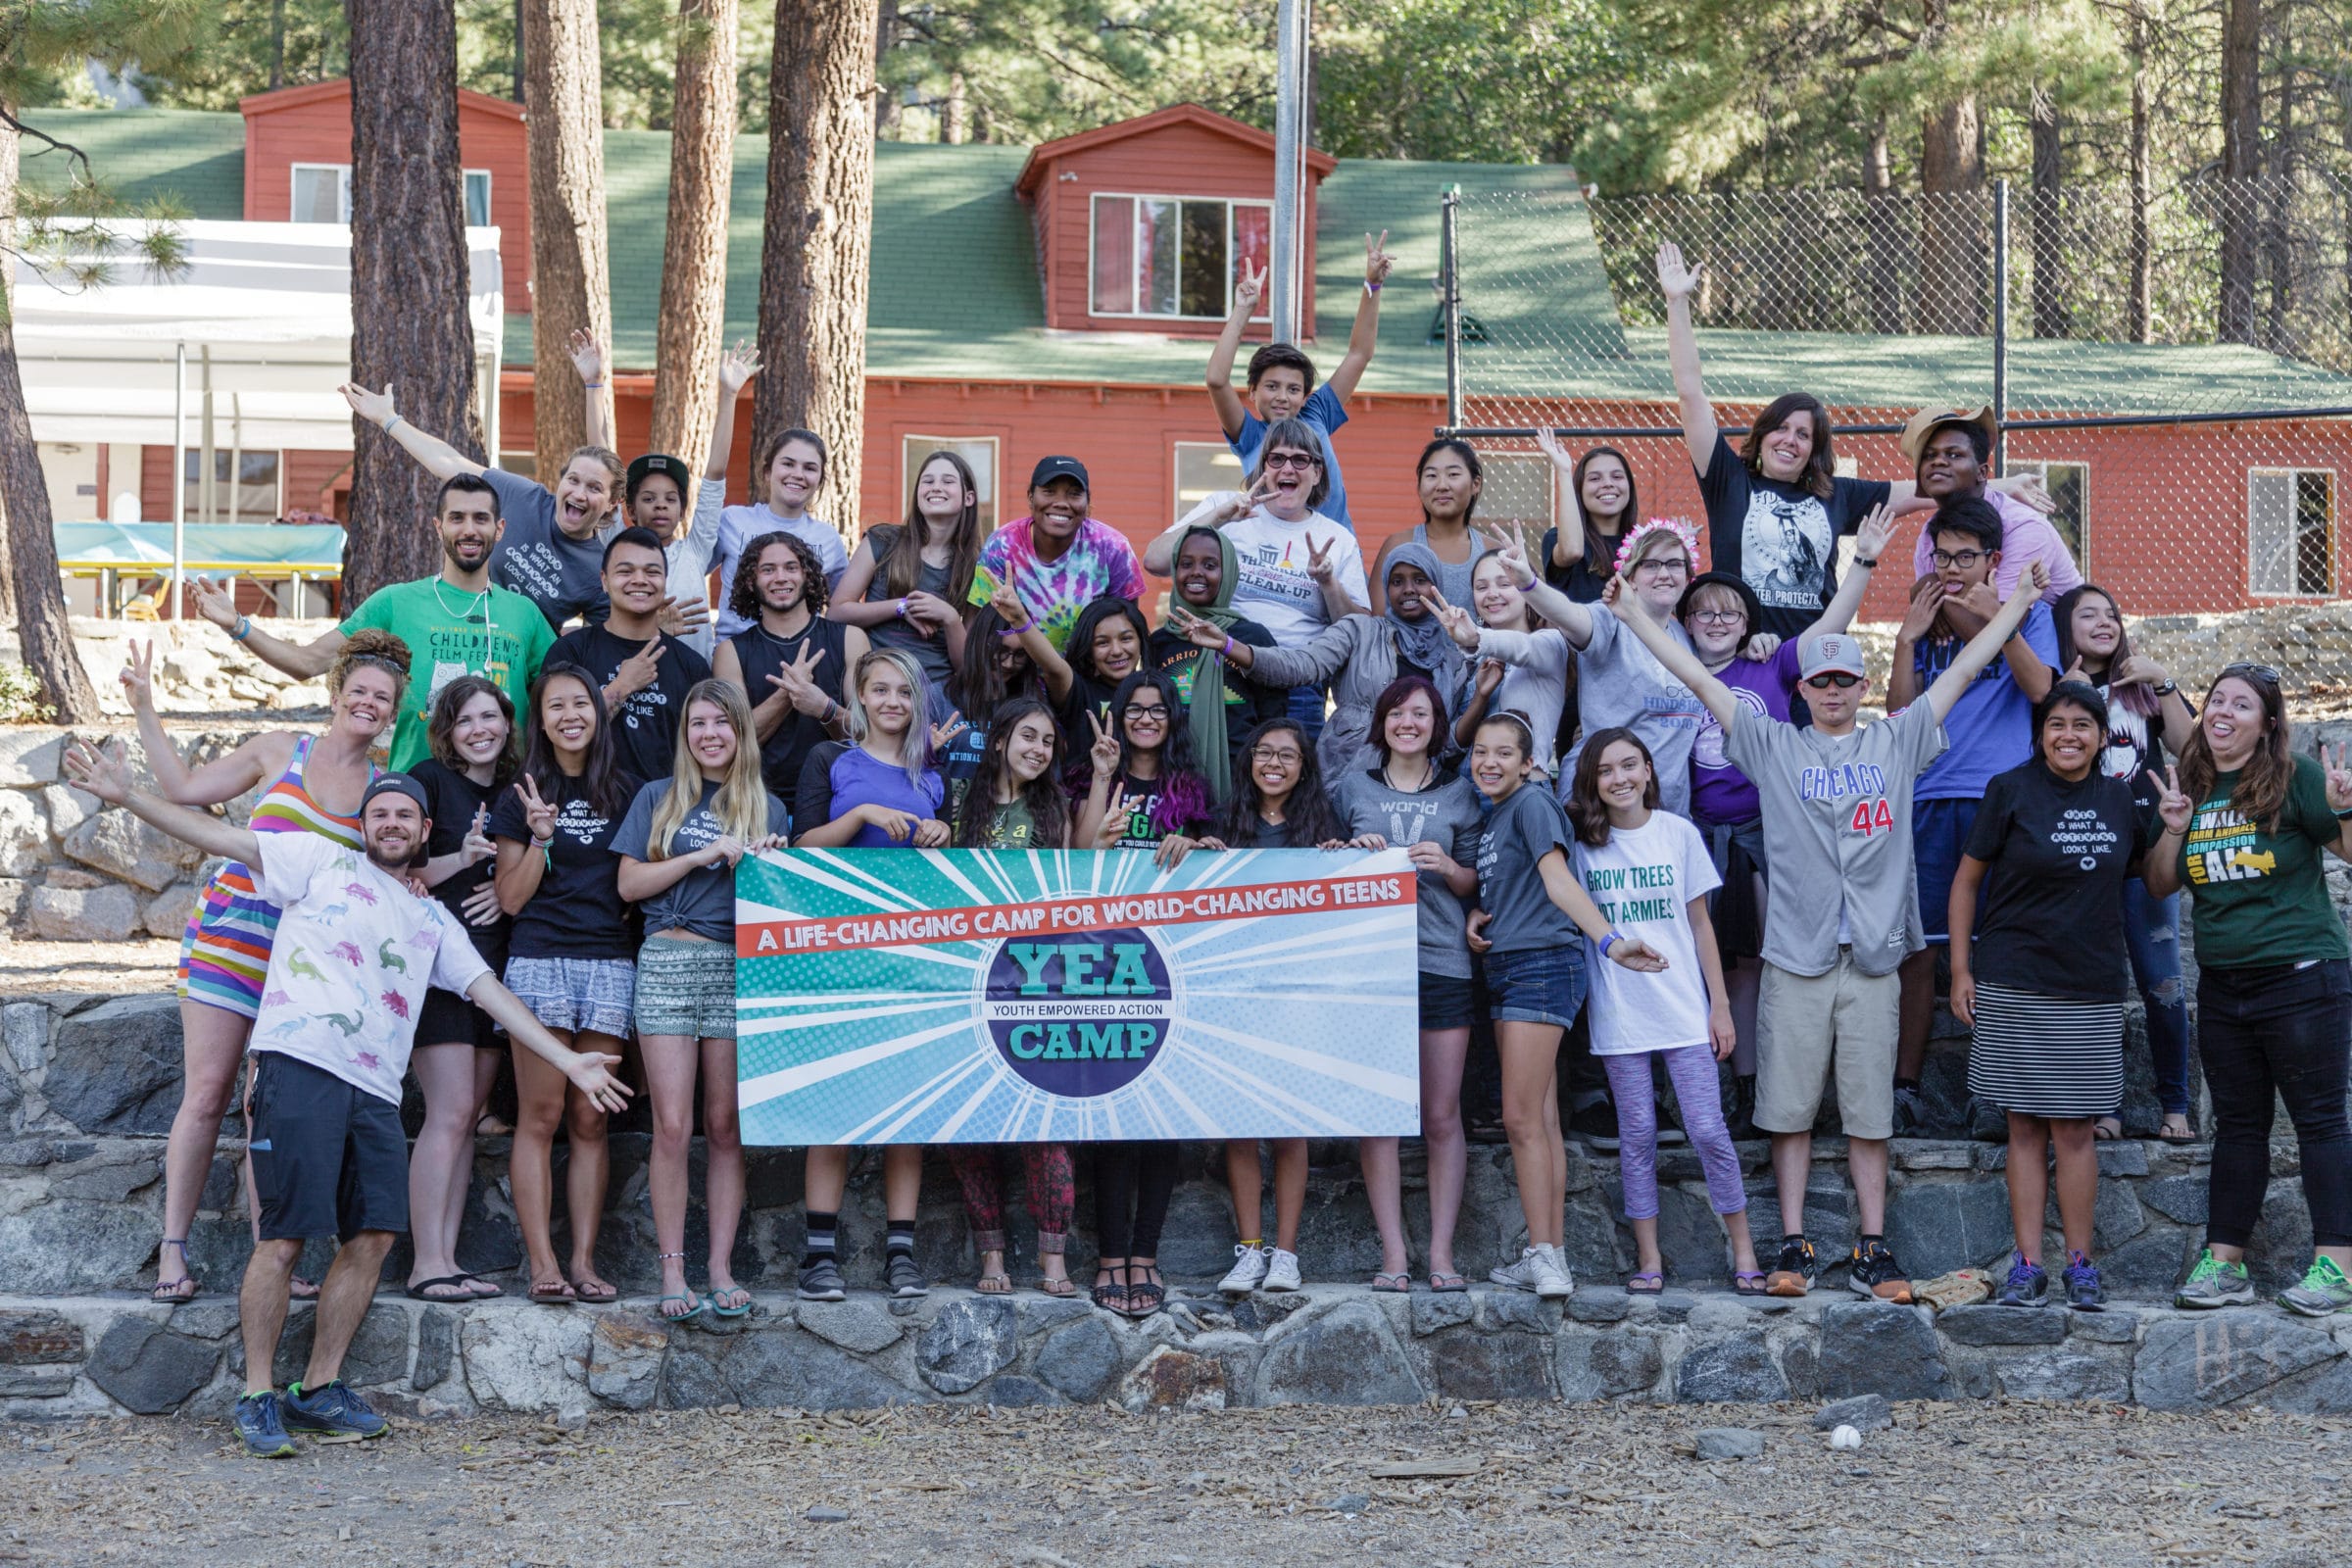 Vegan Summer Camp Is a Dream Come True for Young Changemakers